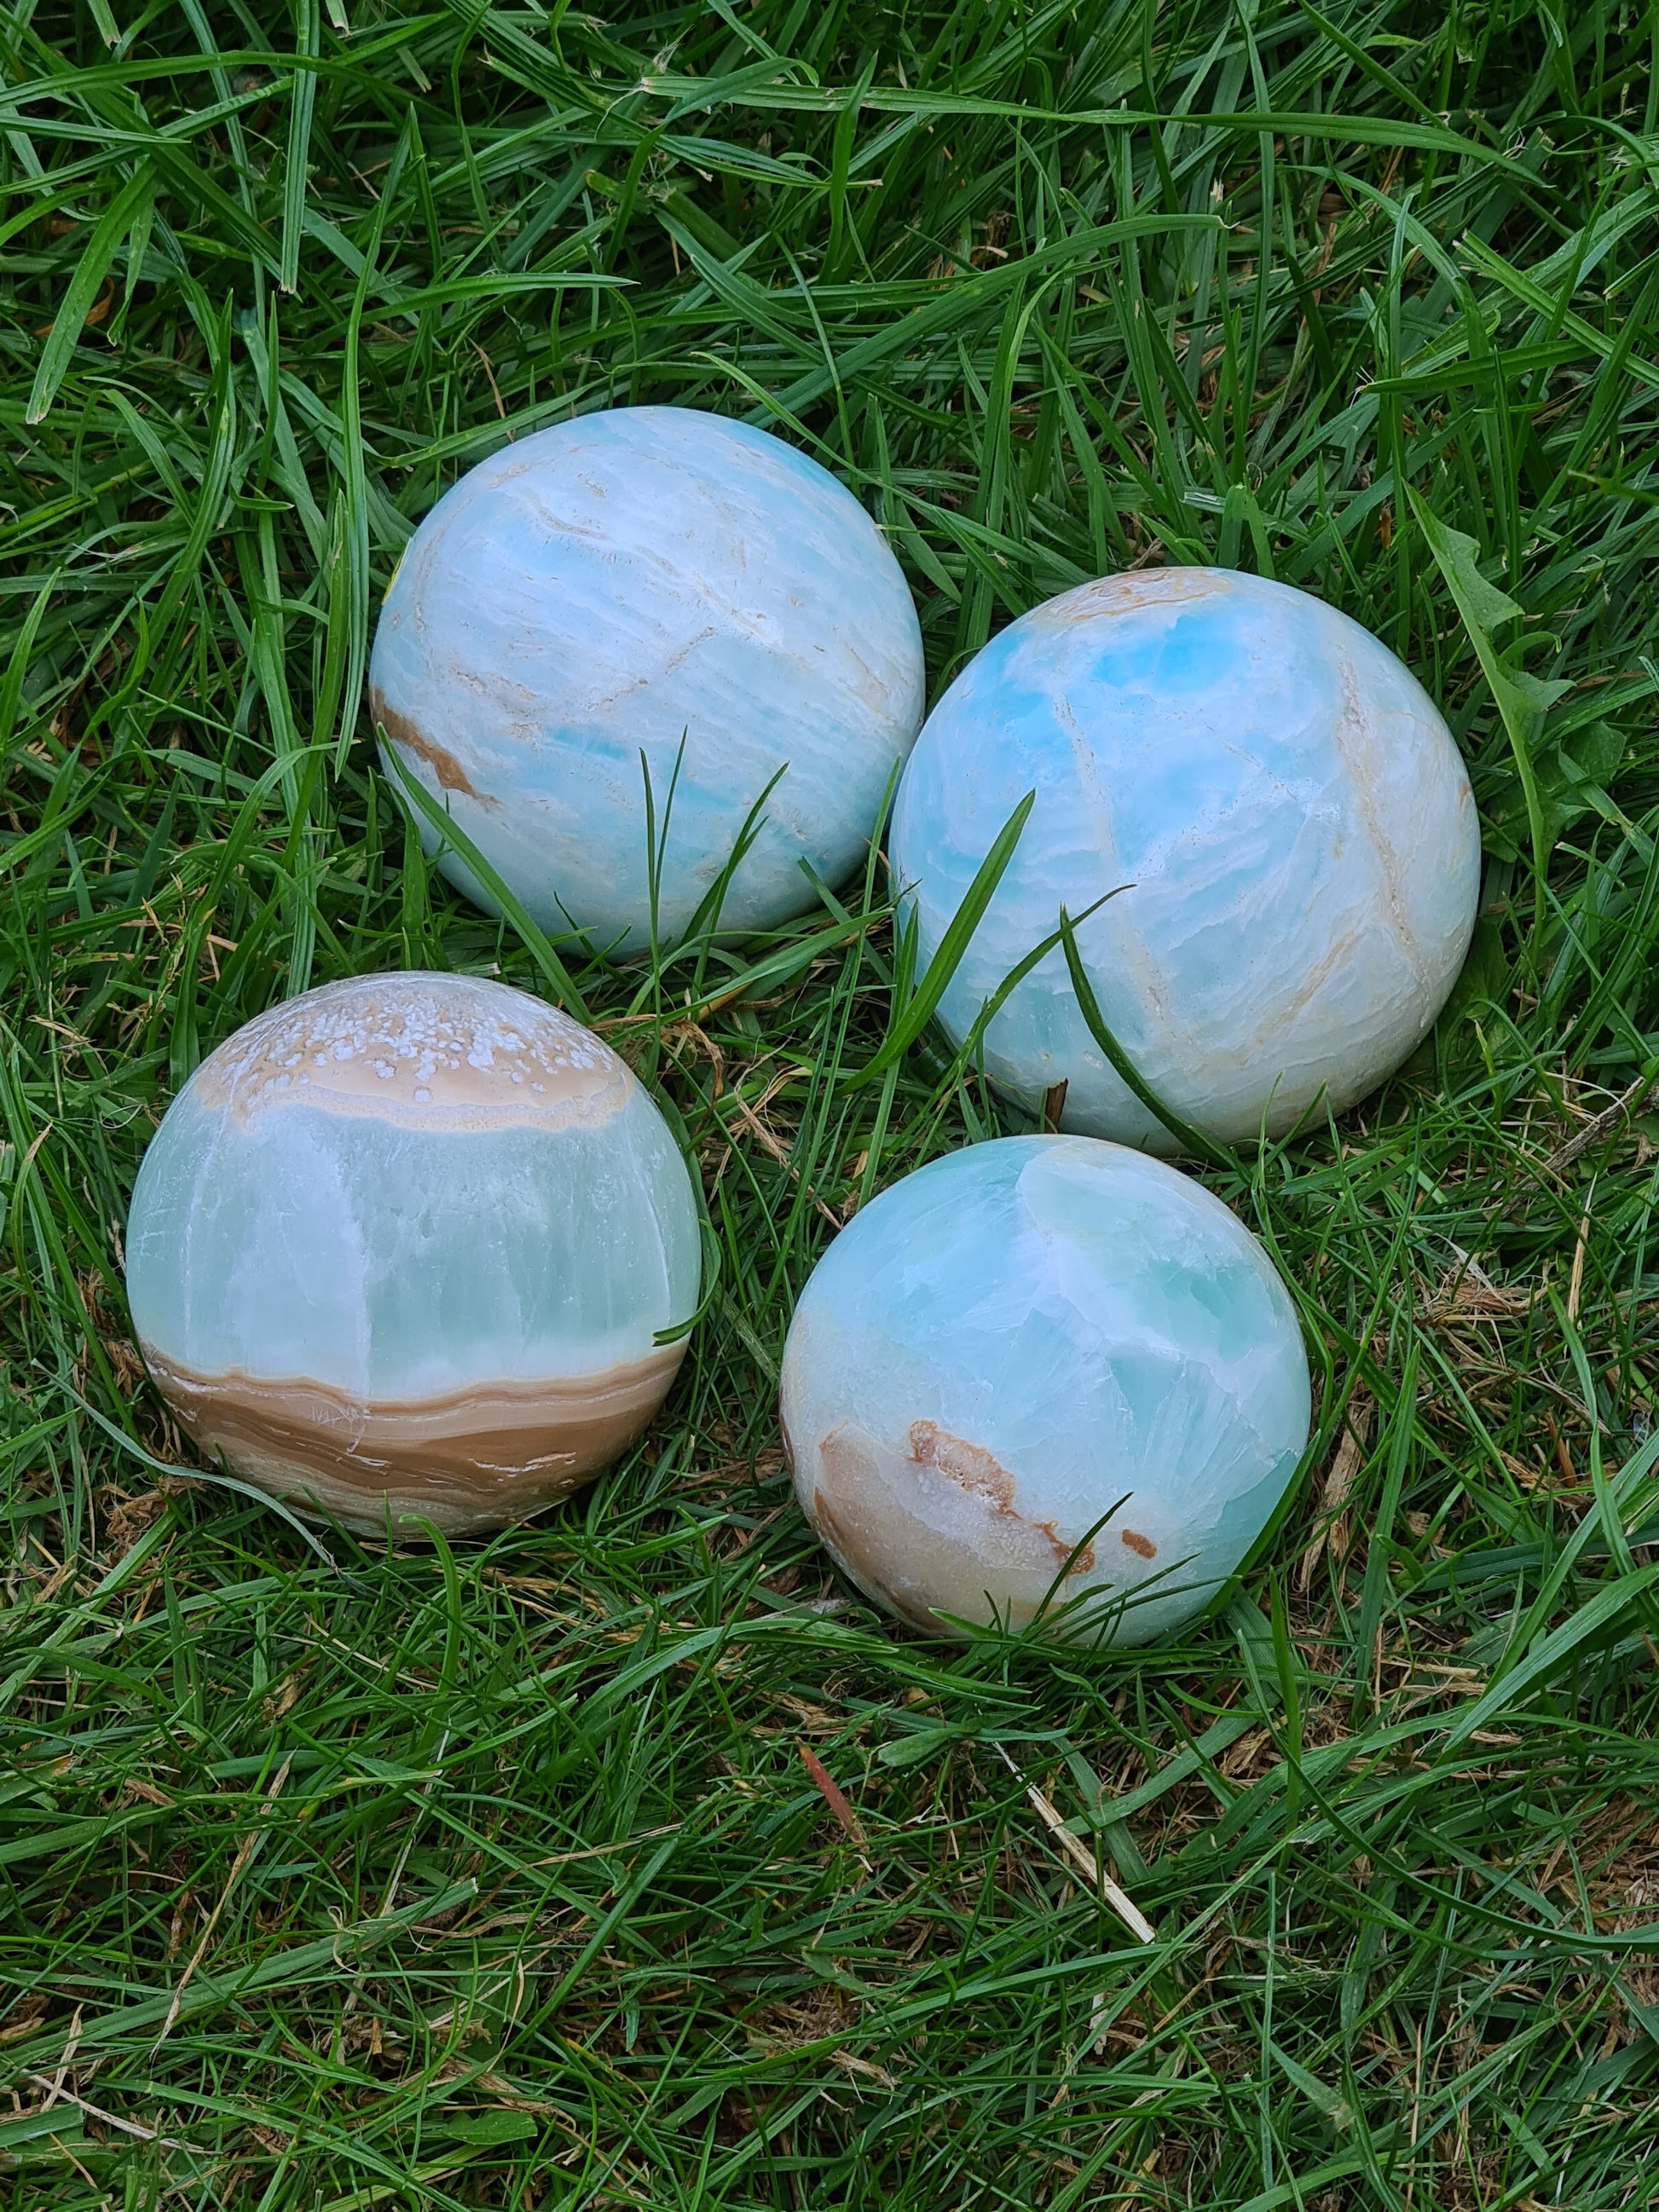 A collection of four Caribbean Calcite Spheres with sea blue calcite, white calcite and brown aragonite banding